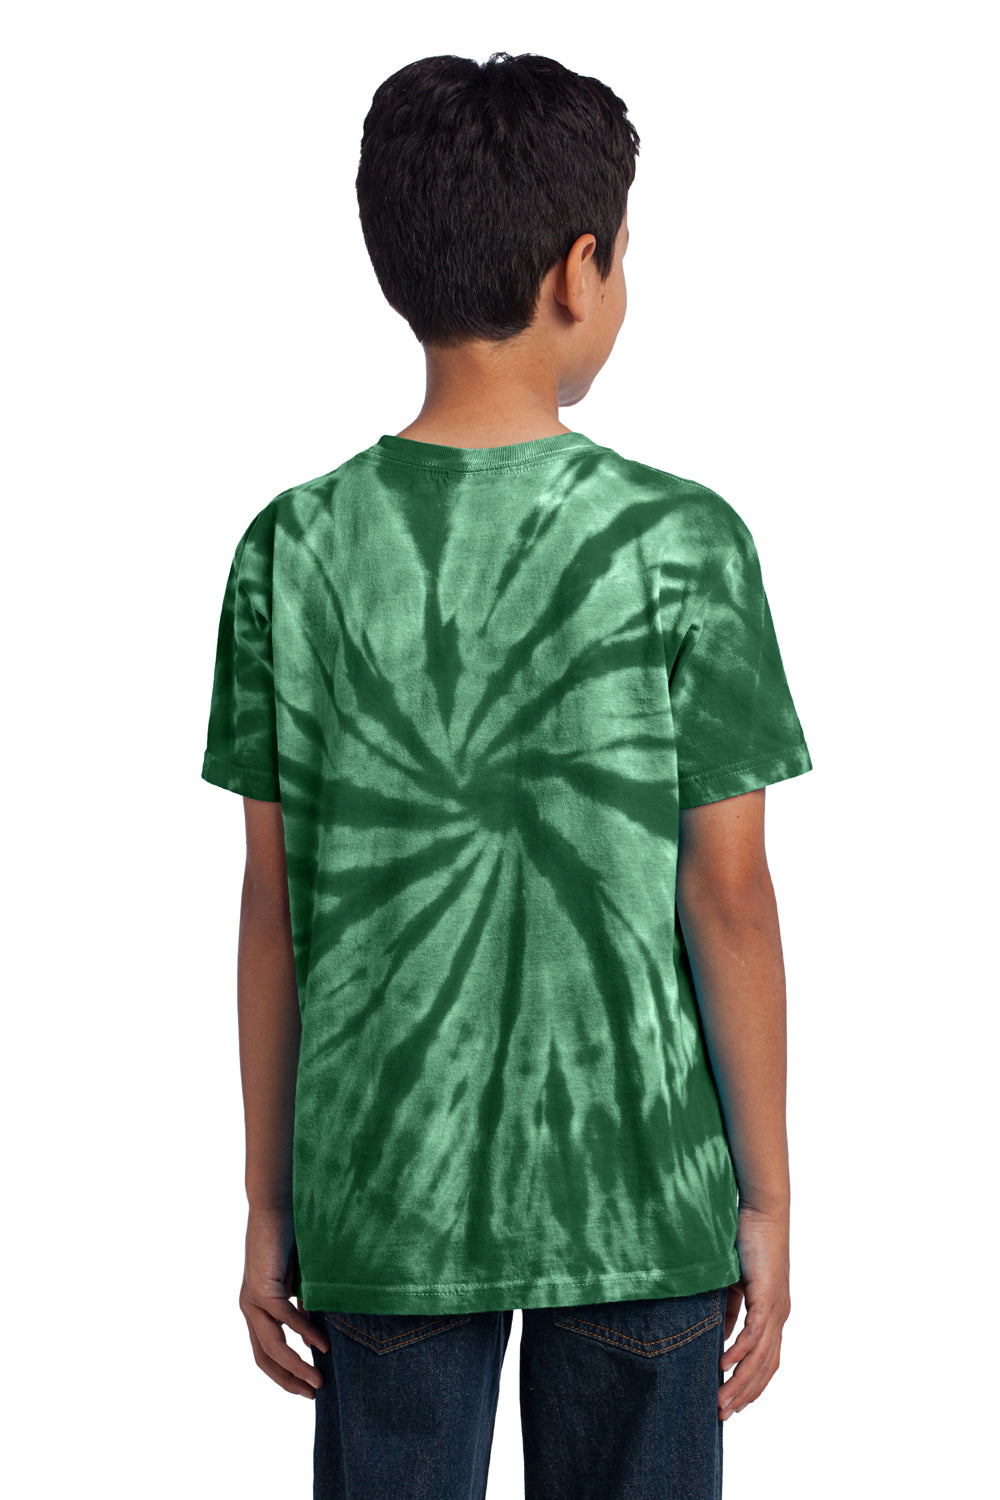 Port & Company PC147Y Youth Tie-Dye Short Sleeve Crewneck T-Shirt Forest Green Back